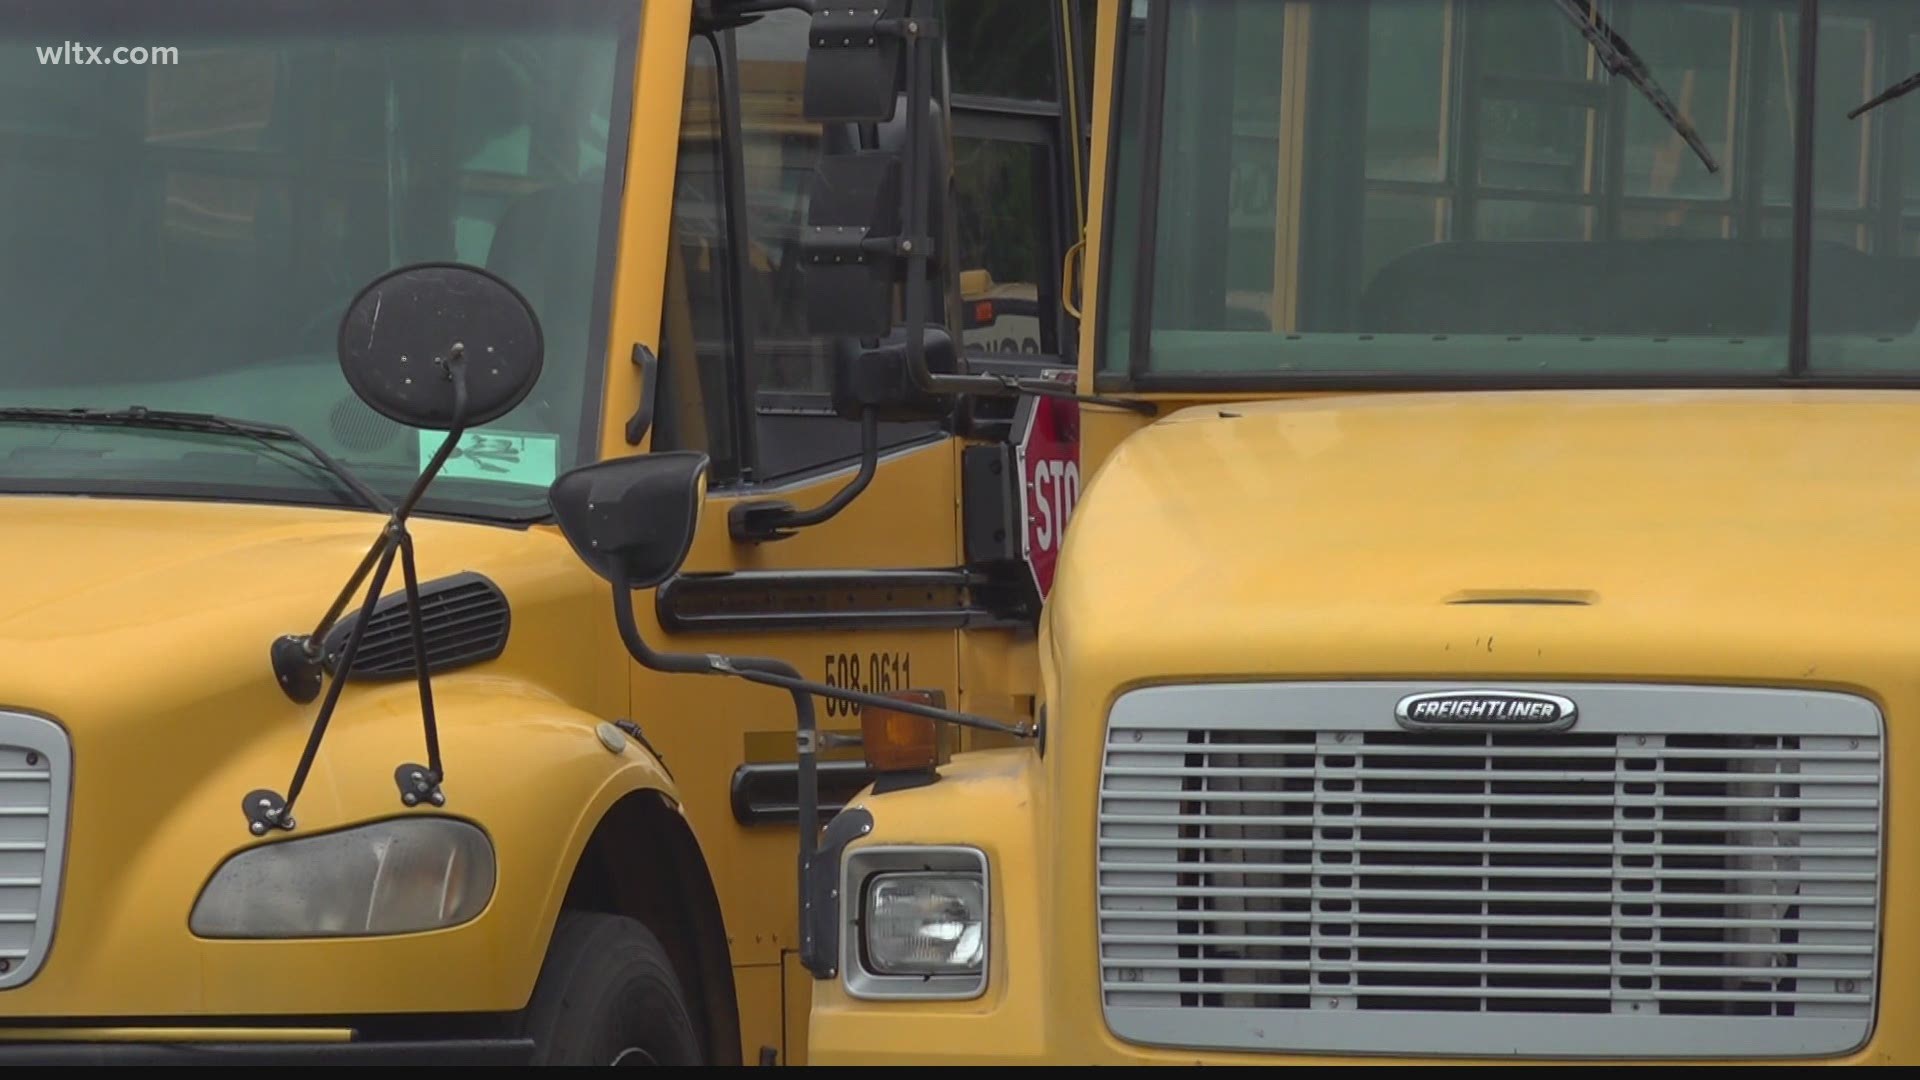 Lawmakers approved the spending plan this week which gives raises to school employees including school bus drivers.